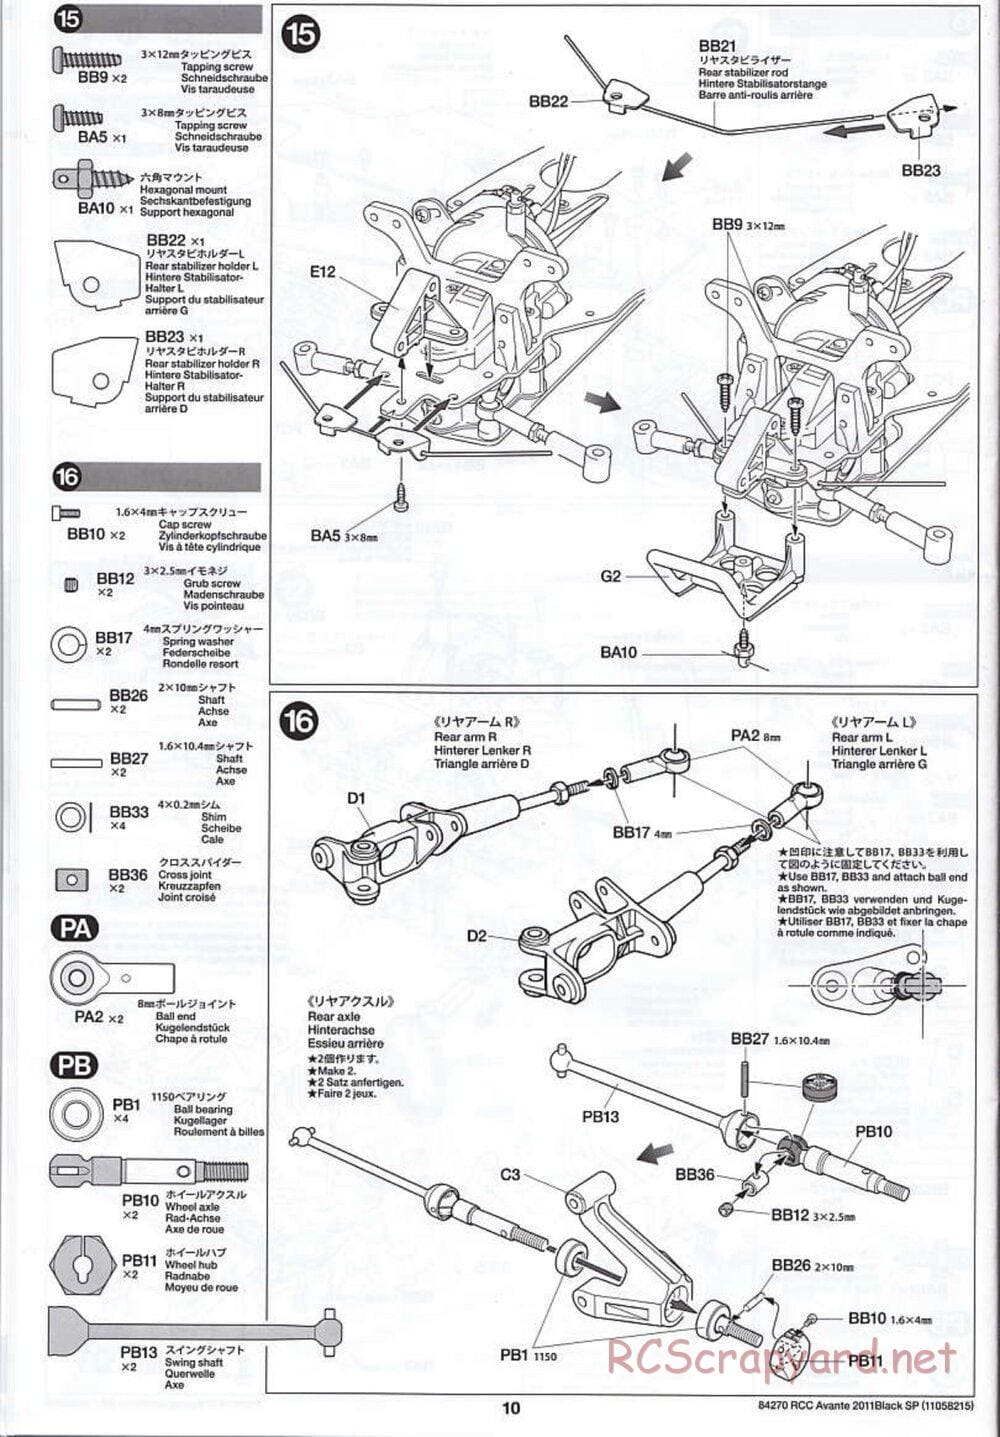 Tamiya - Avante 2011 - Black Special Chassis - Manual - Page 10